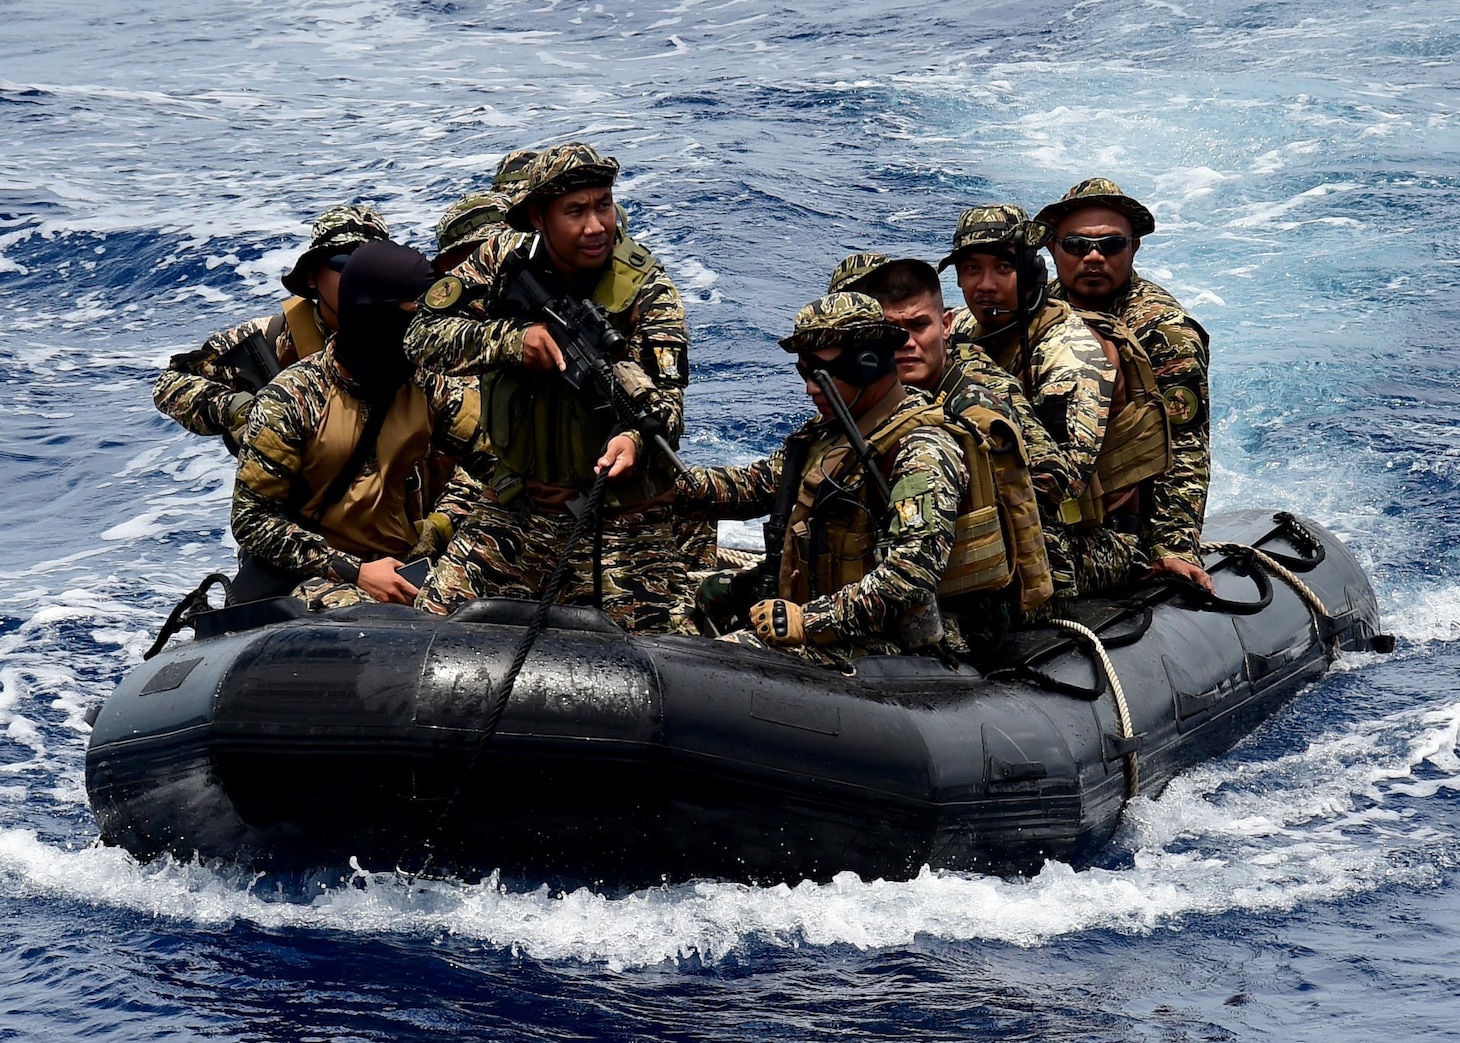 Members of the Philippine Naval Special Operations Group approach USNS Millinocket (T-EPF 3) while participating in Visit, Board, Search and Seizure (VBSS) training during South East Asia Cooperation and Training (SEACAT) 2017 in waters off the coast of Puerto Princesa, Philippines, Aug. 30.  2017 is the 16th annual SEACAT exercise and includes participants from the U.S. Coast Guard and Coast Guards and Coastal Patrol Agencies from the Philippines, Singapore, Vietnam, Malaysia, and Indonesia.